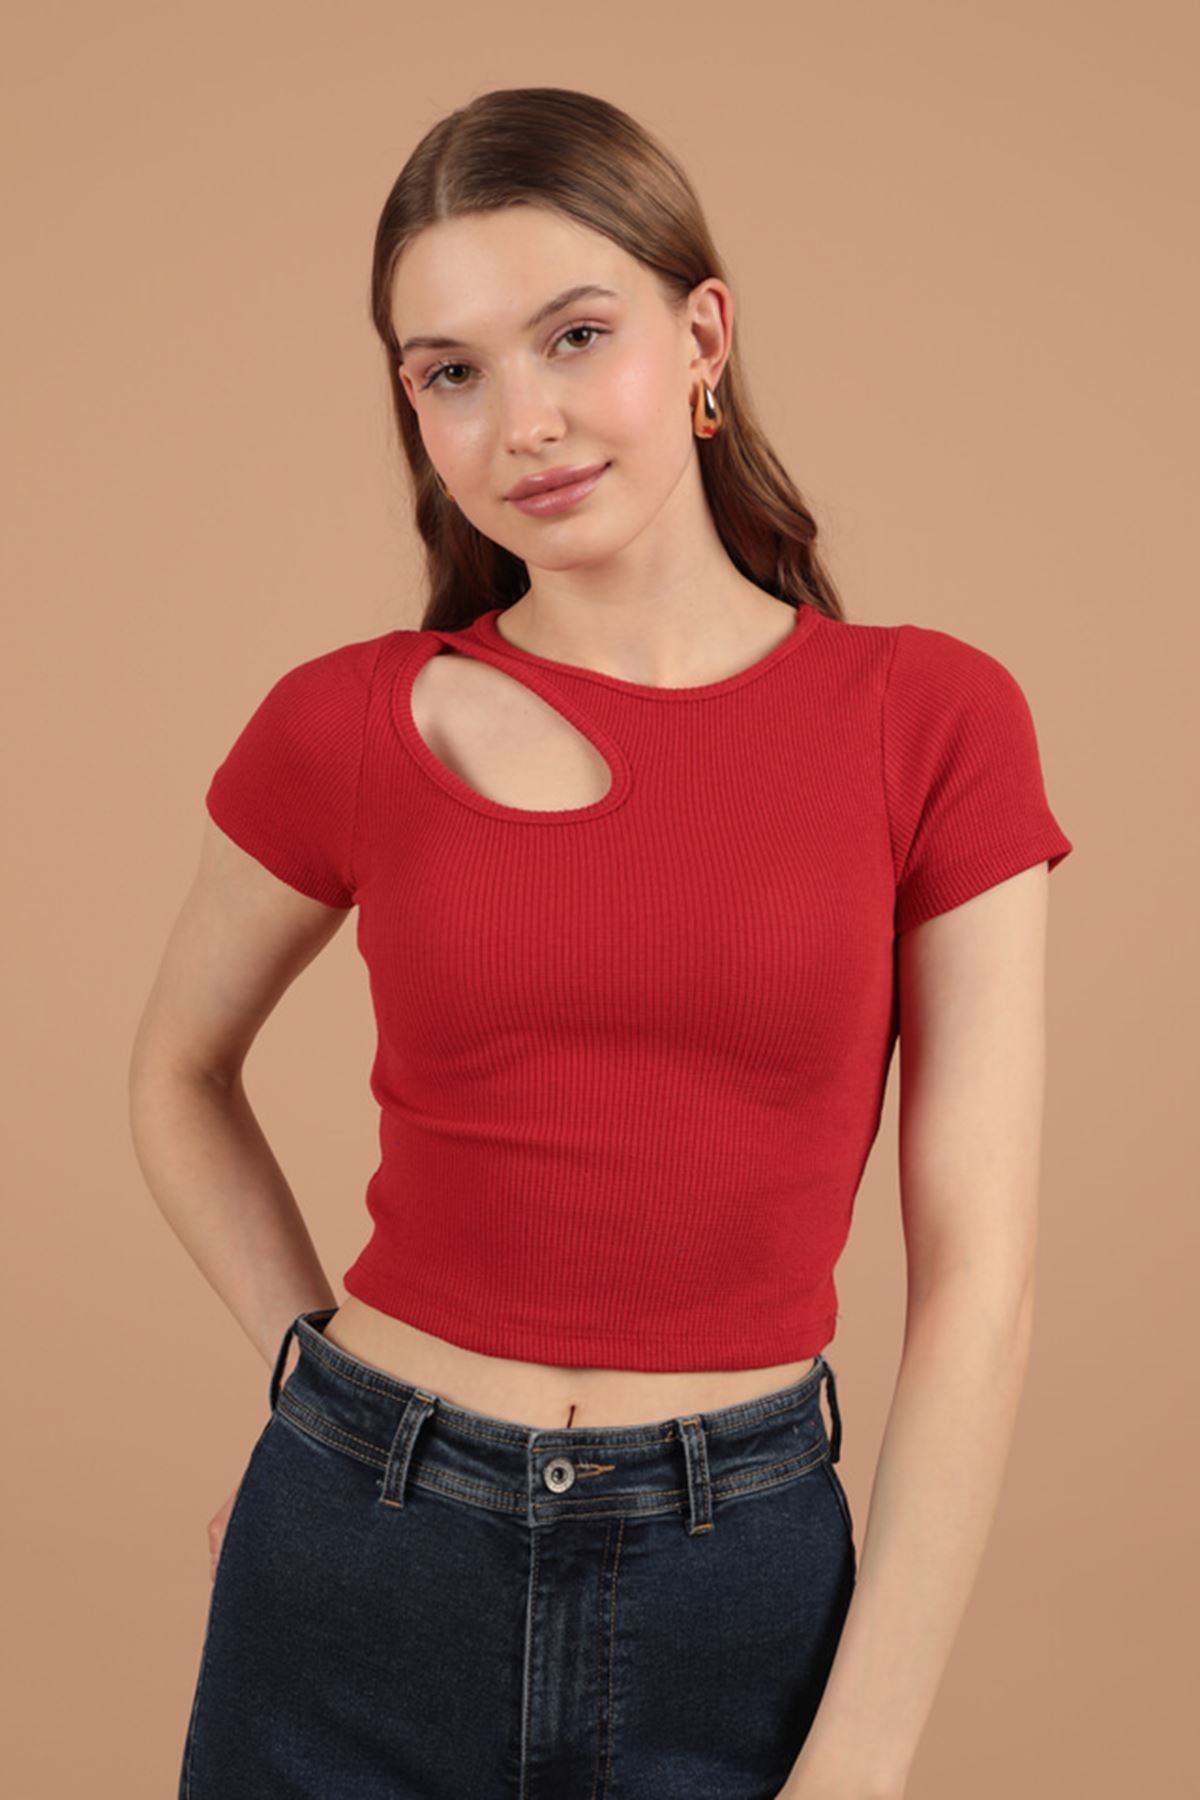 Camisole Drop Neck Women's Short Sleeve Blouse-Red - STREETMODE™